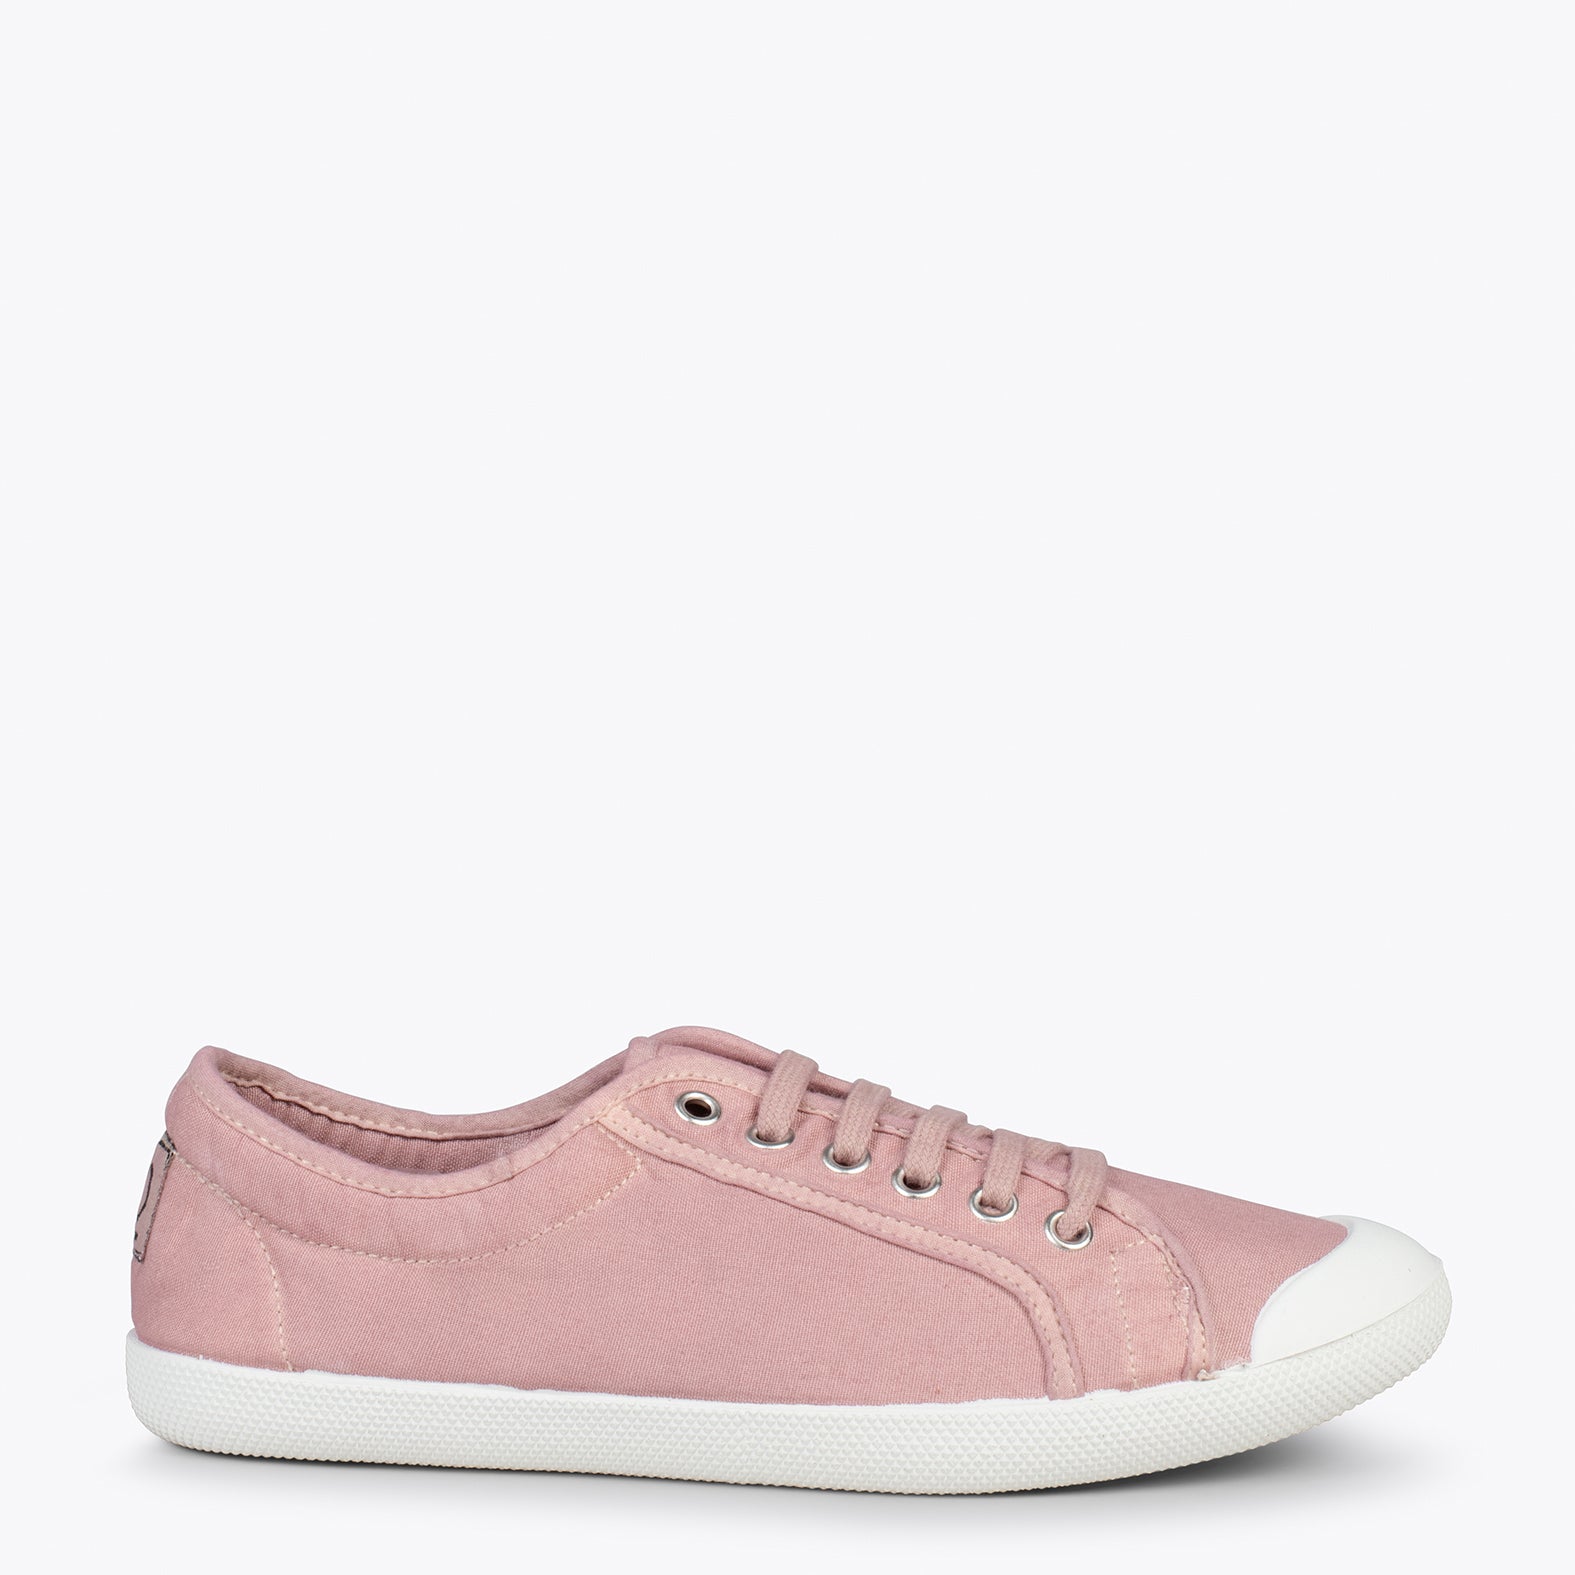 BAOBAB – PINK BCI cotton sneakers from IO&GO